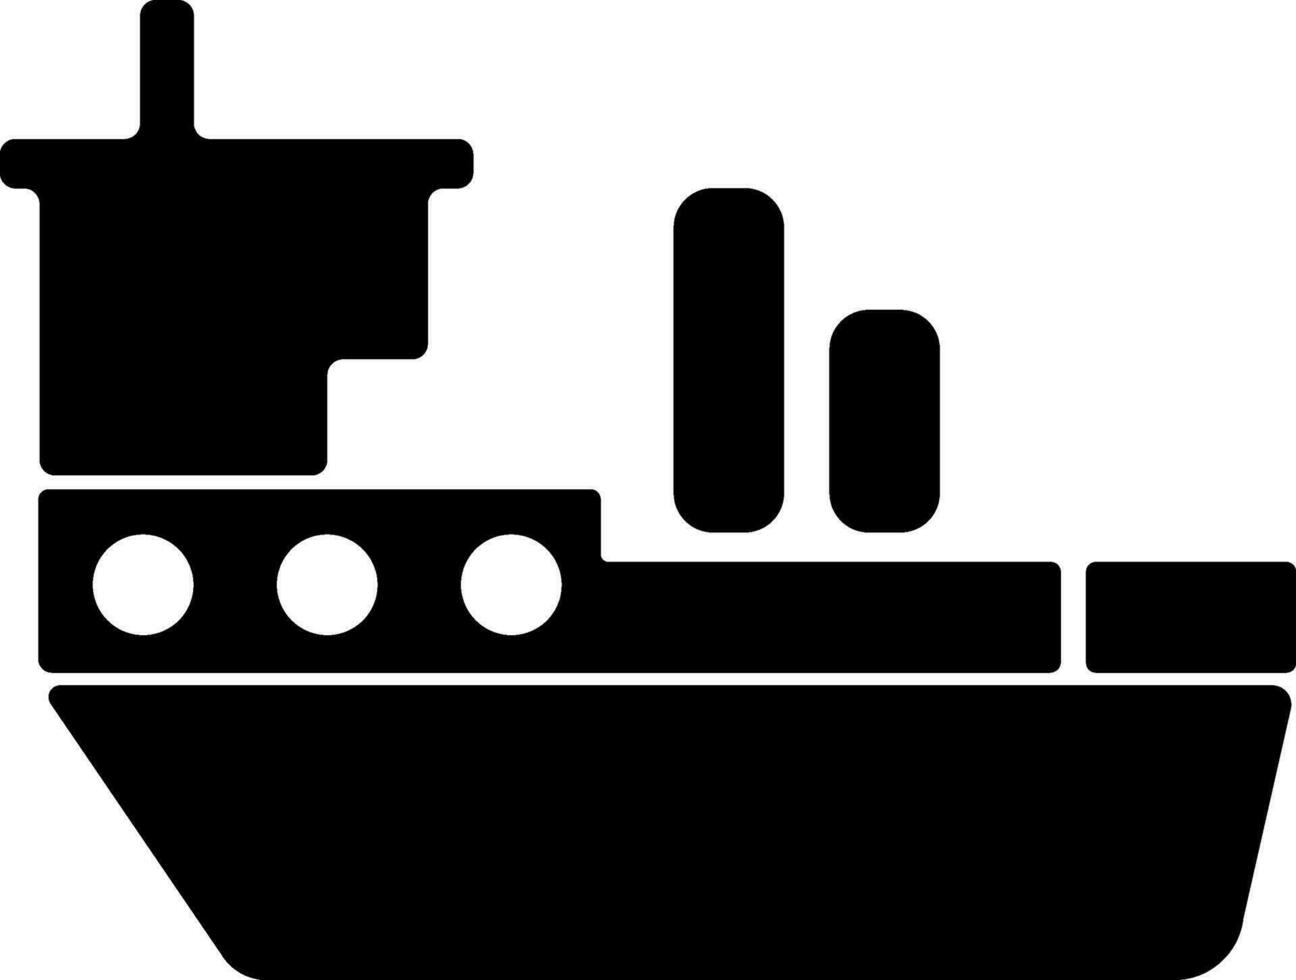 Flat sign or symbol of a Ship. vector